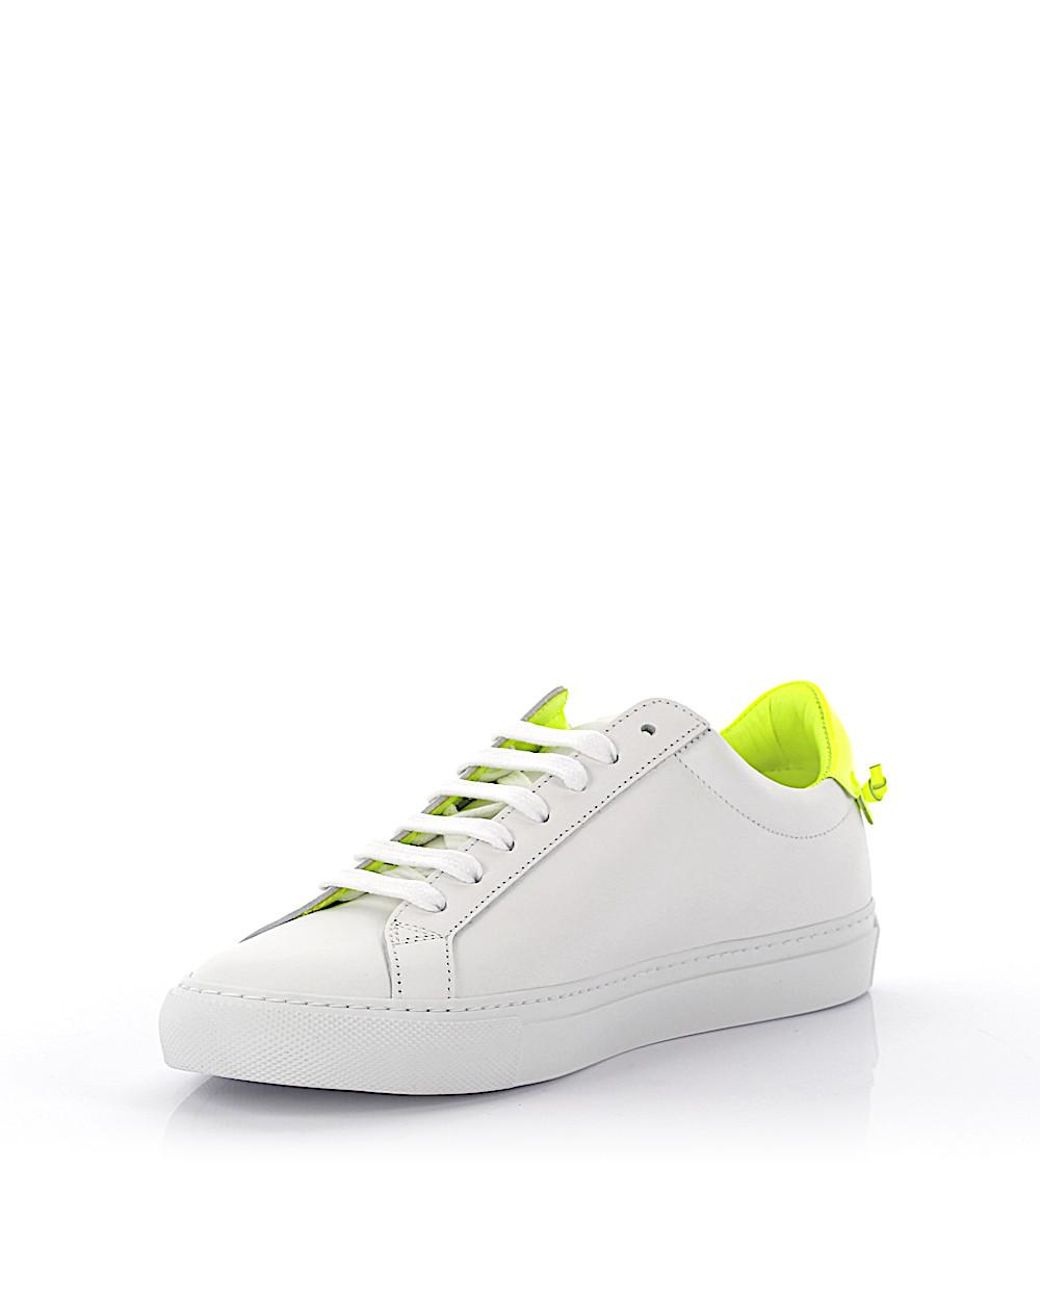 Givenchy Sneakers Urban Knots Leather White Neon Yellow for Men | Lyst